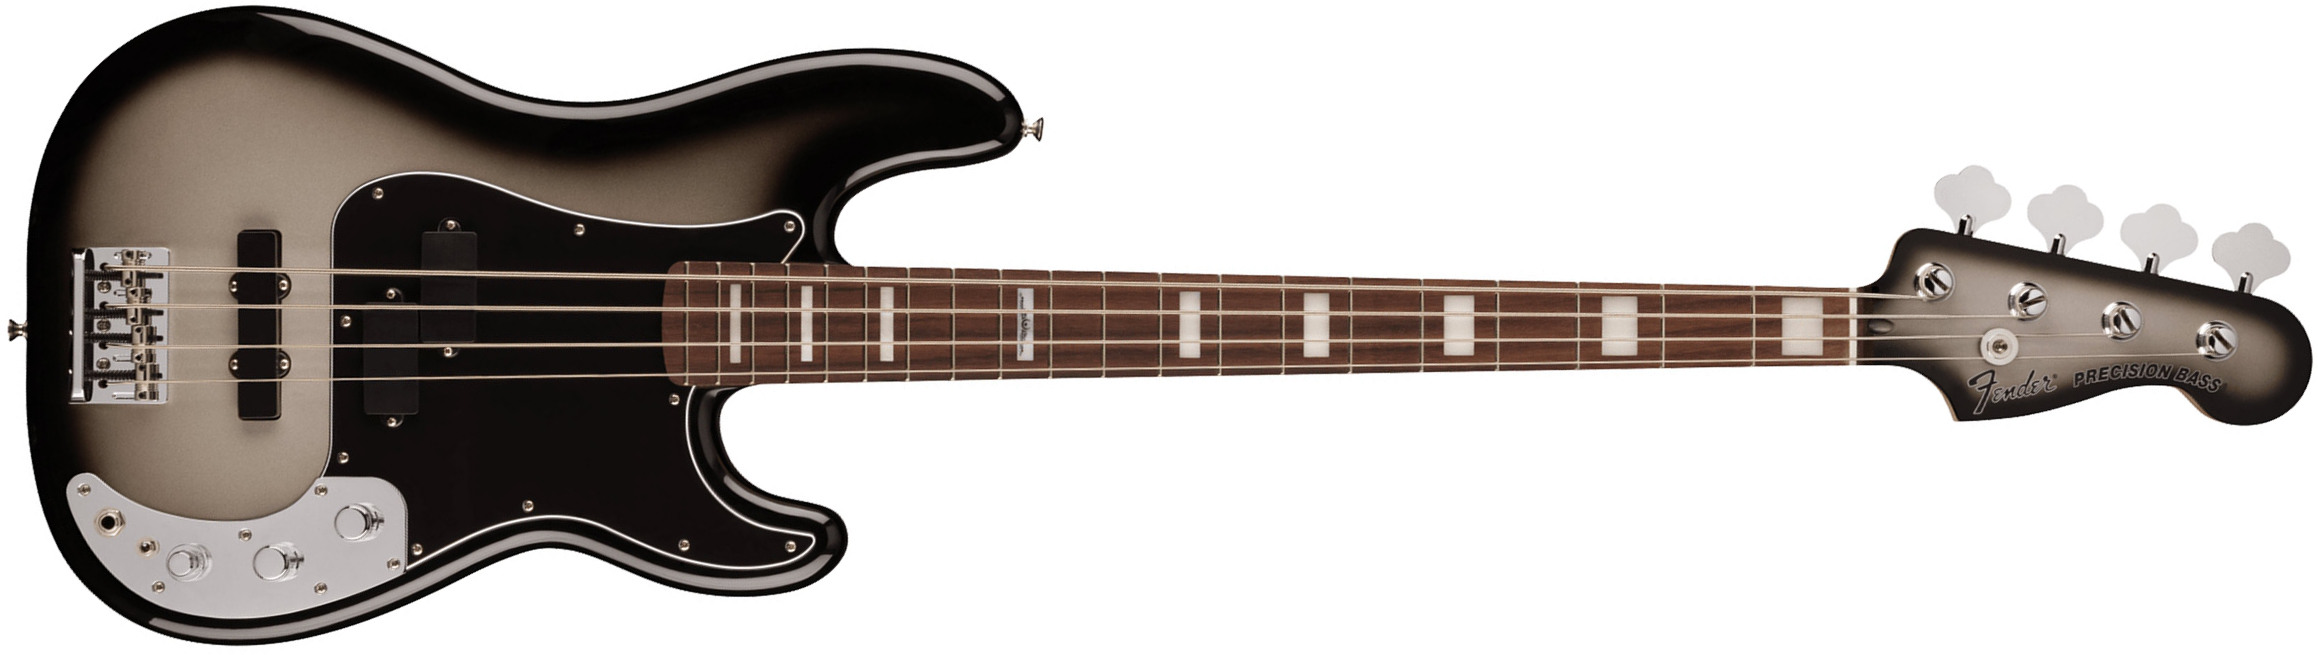 Fender Troy Sanders Precision Bass Signature Active Rw - Silverburst - Solidbody E-bass - Main picture